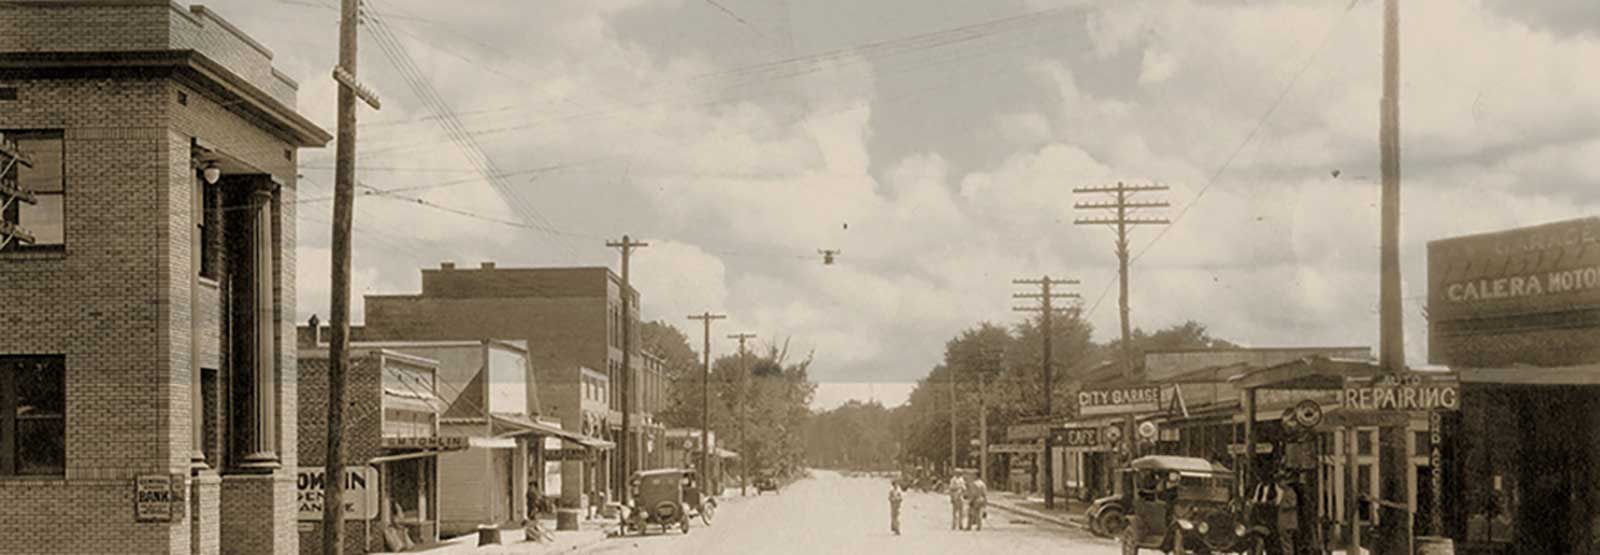 Main street in 1916 showing bank building and other buildings and cars on the street.